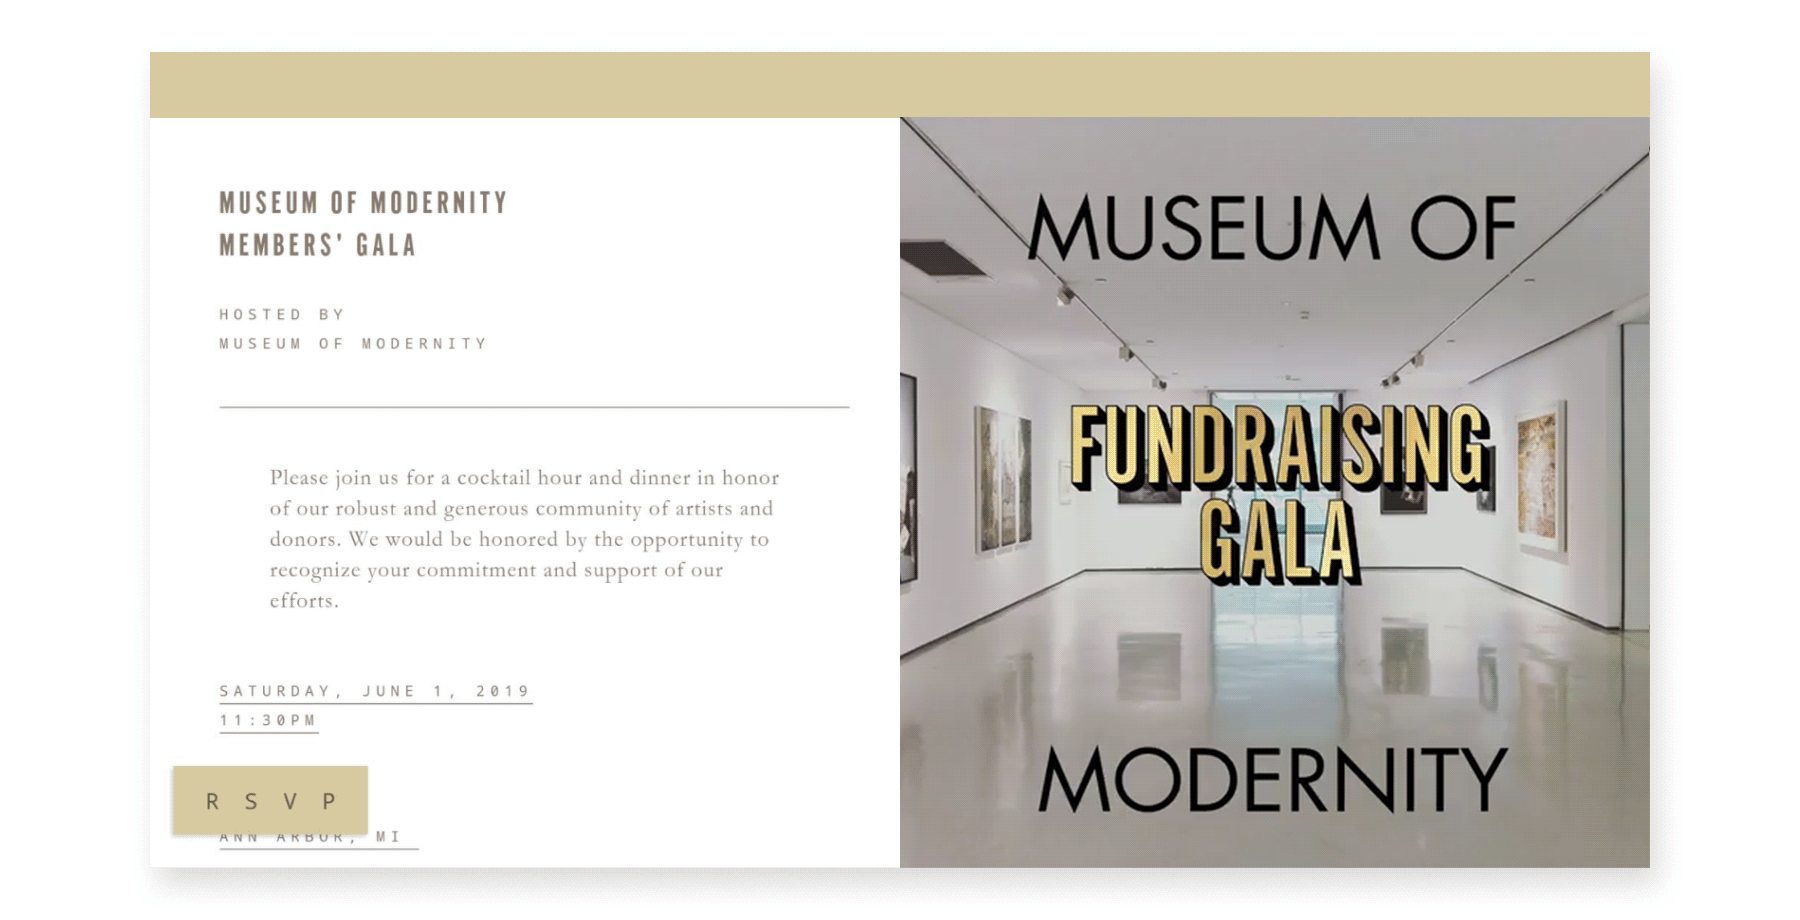 An online invite for a Museum of Modernity Fundraising Gala with a photo of an art gallery.